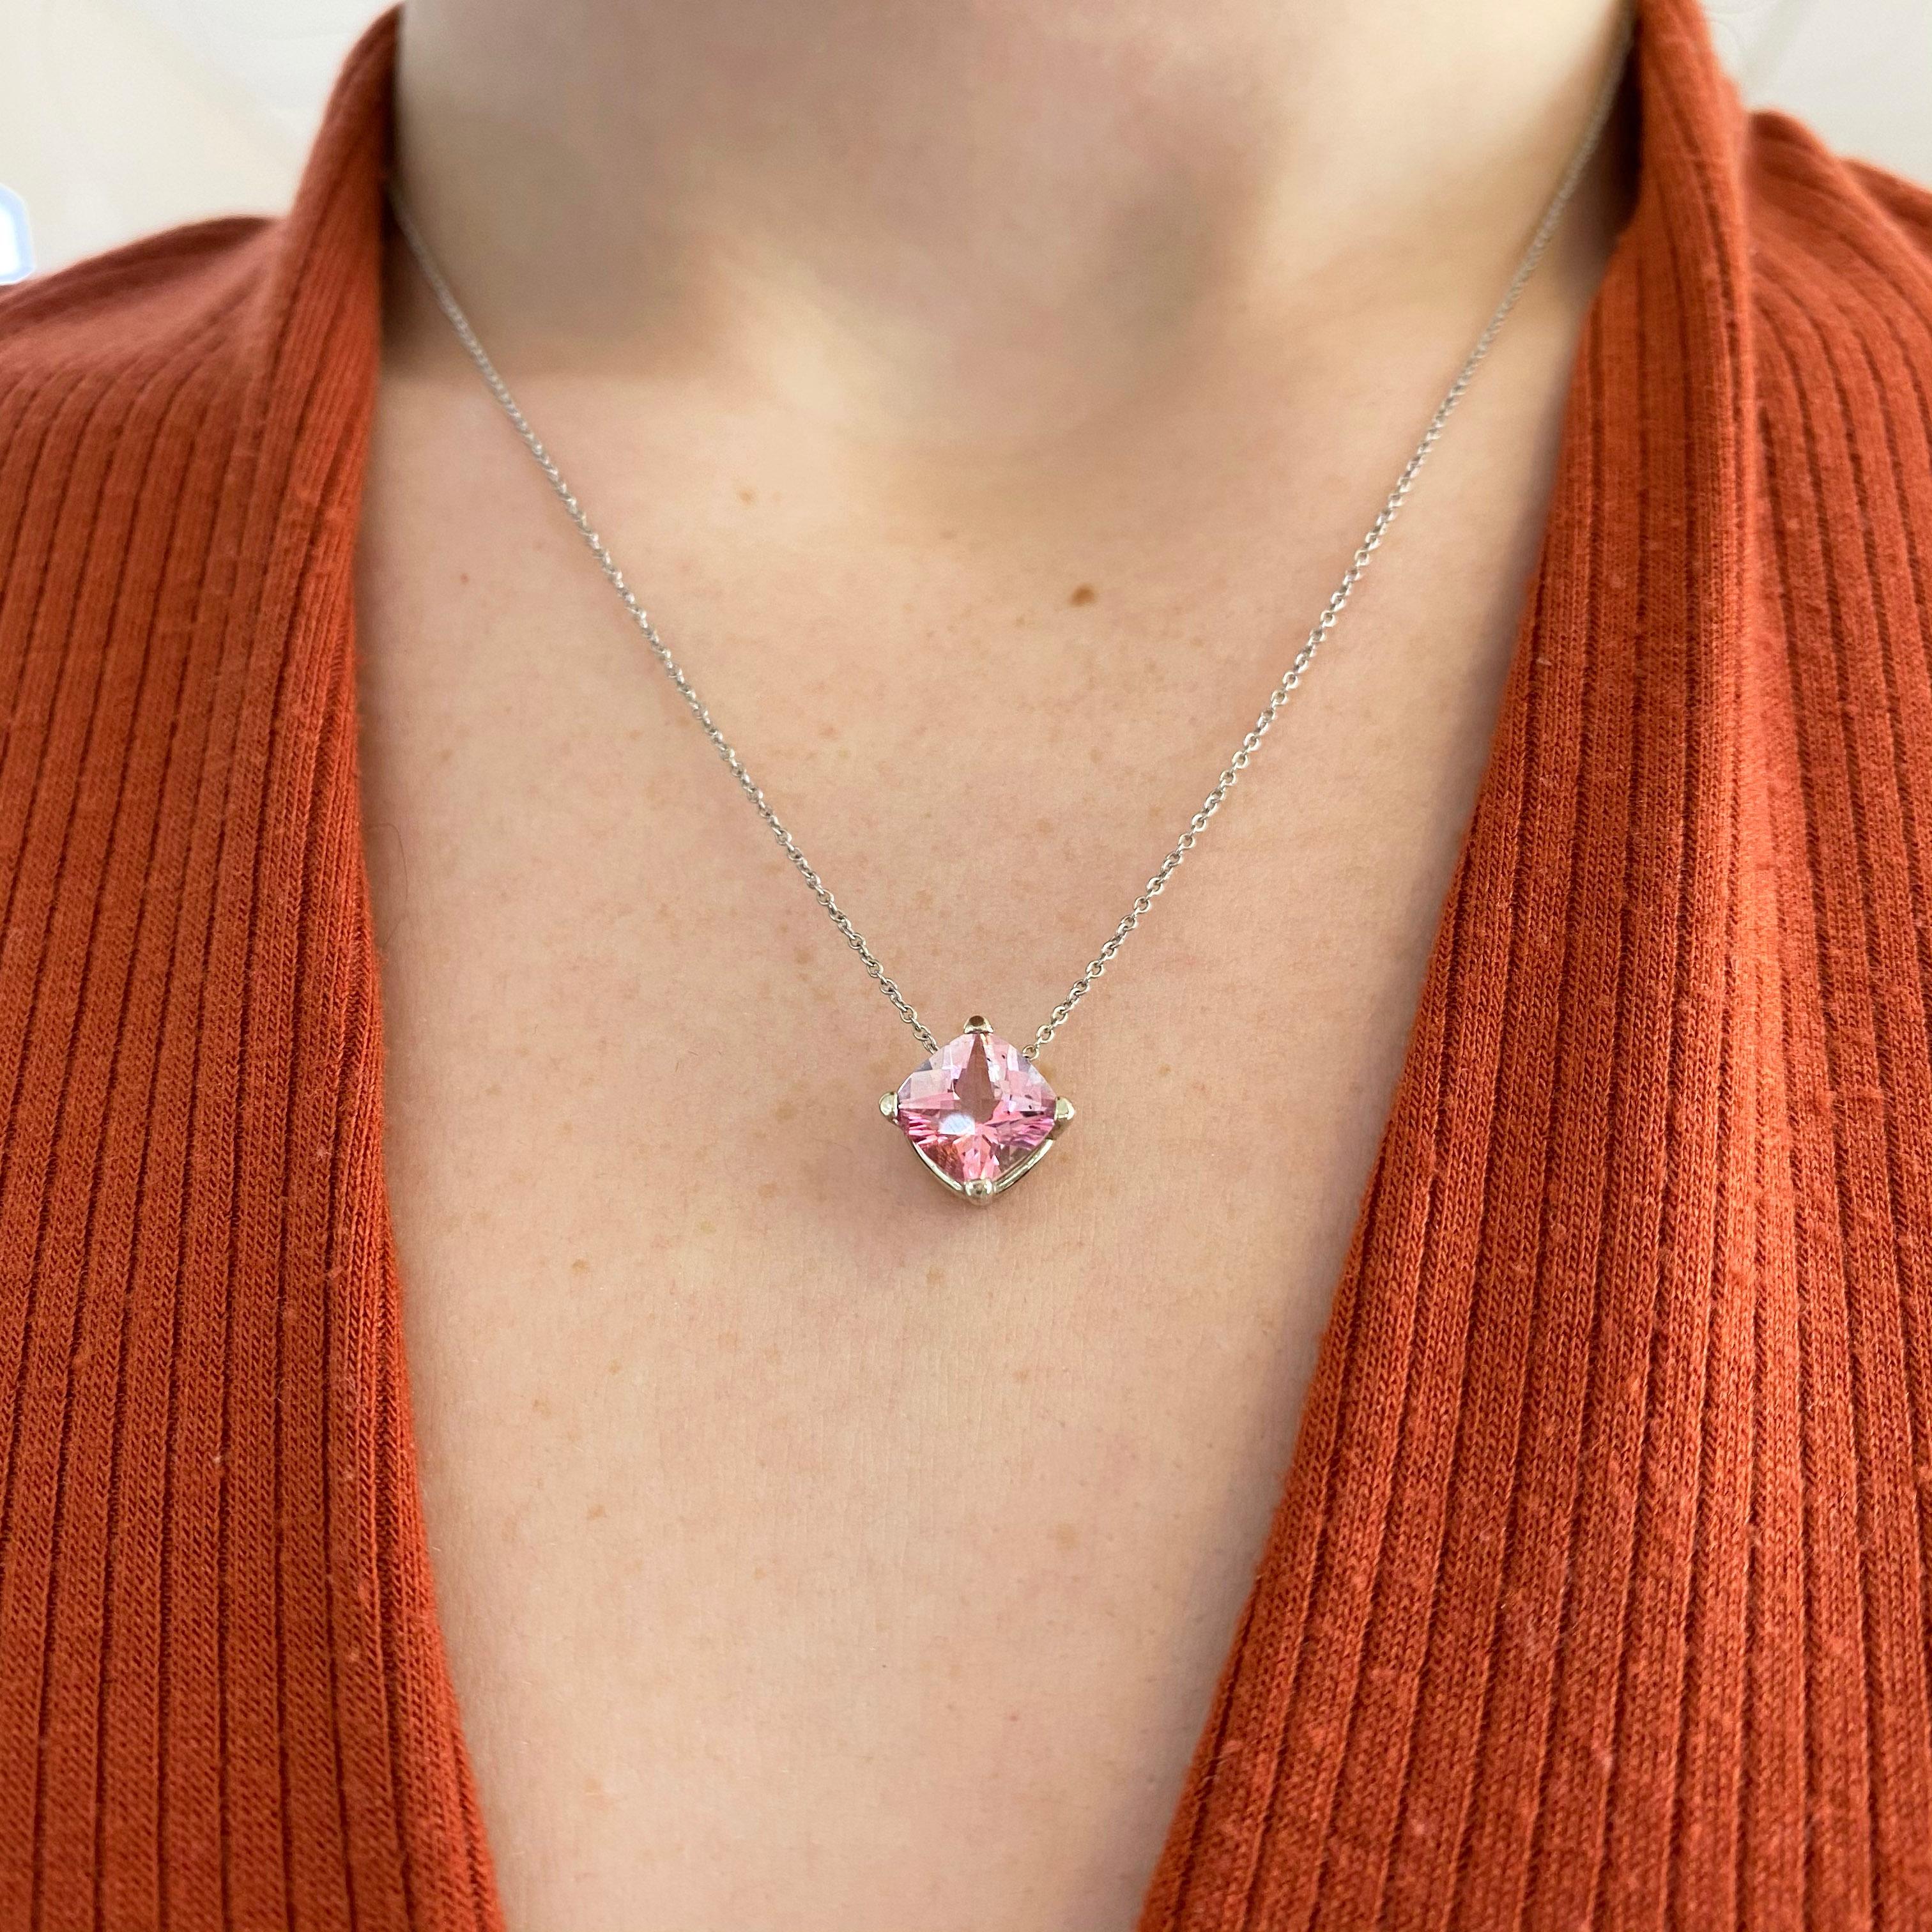 Pink Lover Special! Do you love pink and 14 karat white gold together.  This one of a kind necklace has a cushion cut 1.75 carat genuine pink topaz gemstone set in four prongs.  There is a lovely cable chain in 14 karat white gold.  This looks